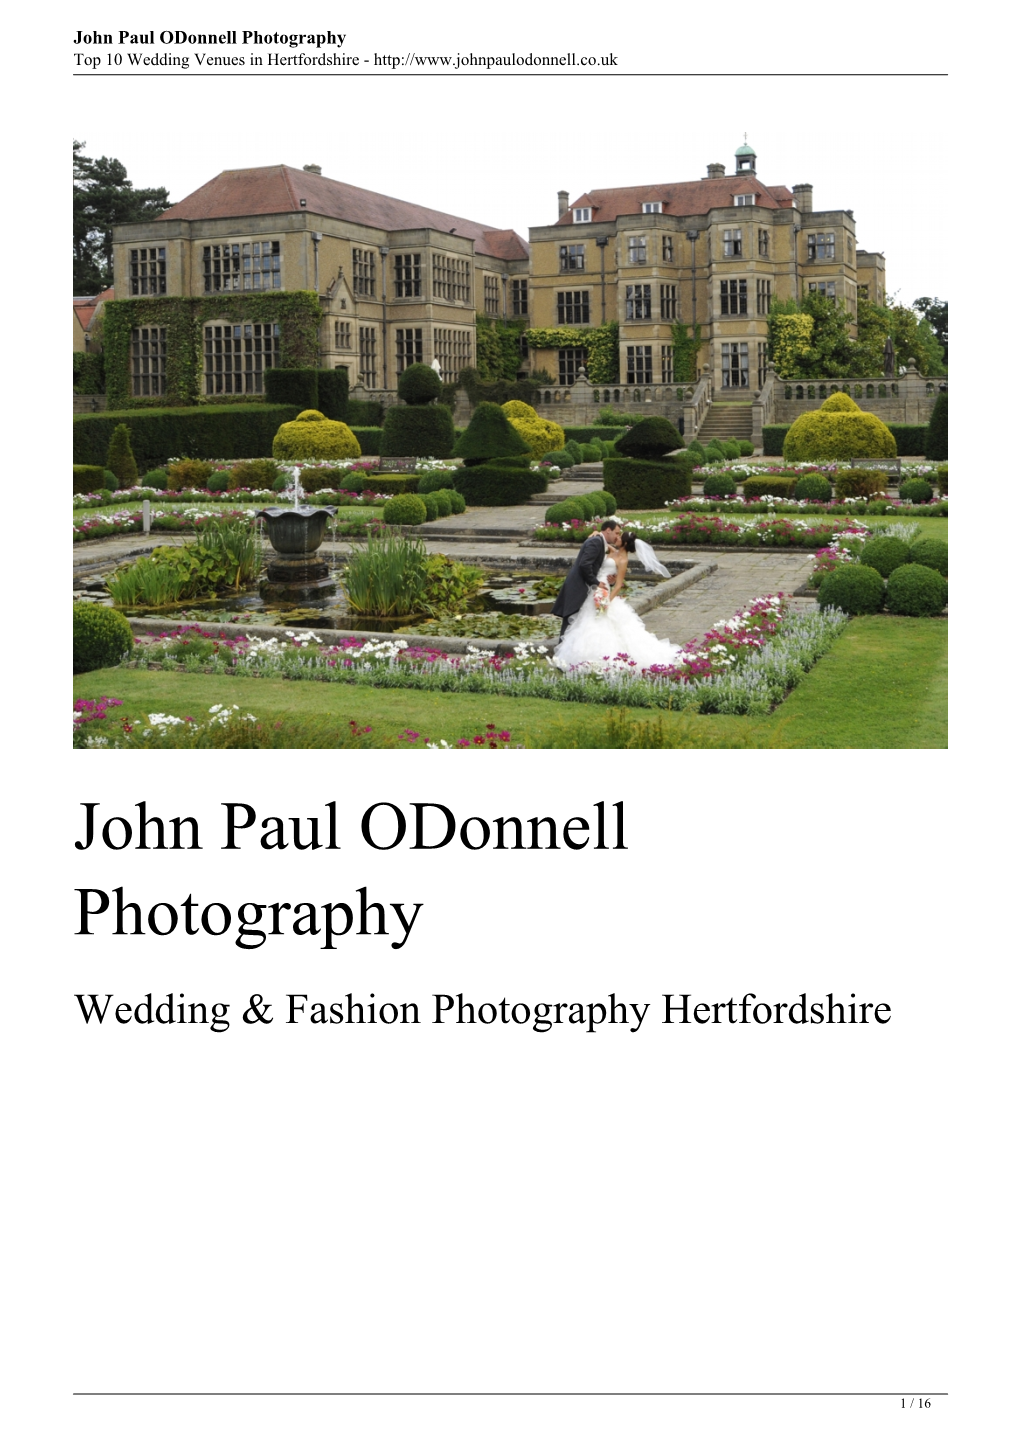 John Paul Odonnell Photography Top 10 Wedding Venues in Hertfordshire